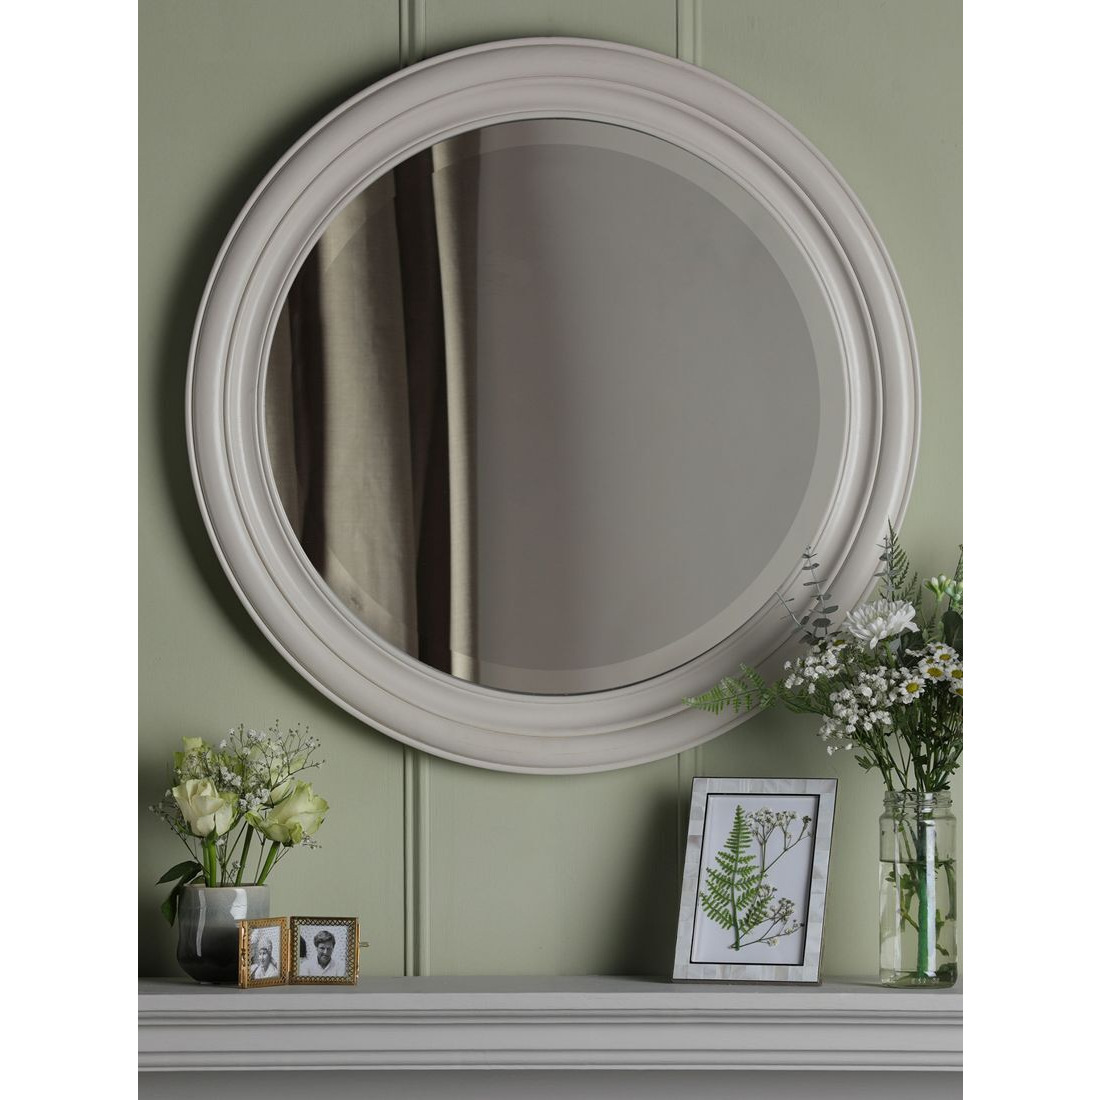 Laura Ashley Tate Round Wood Wall Mirror, 60cm, Off White - image 1